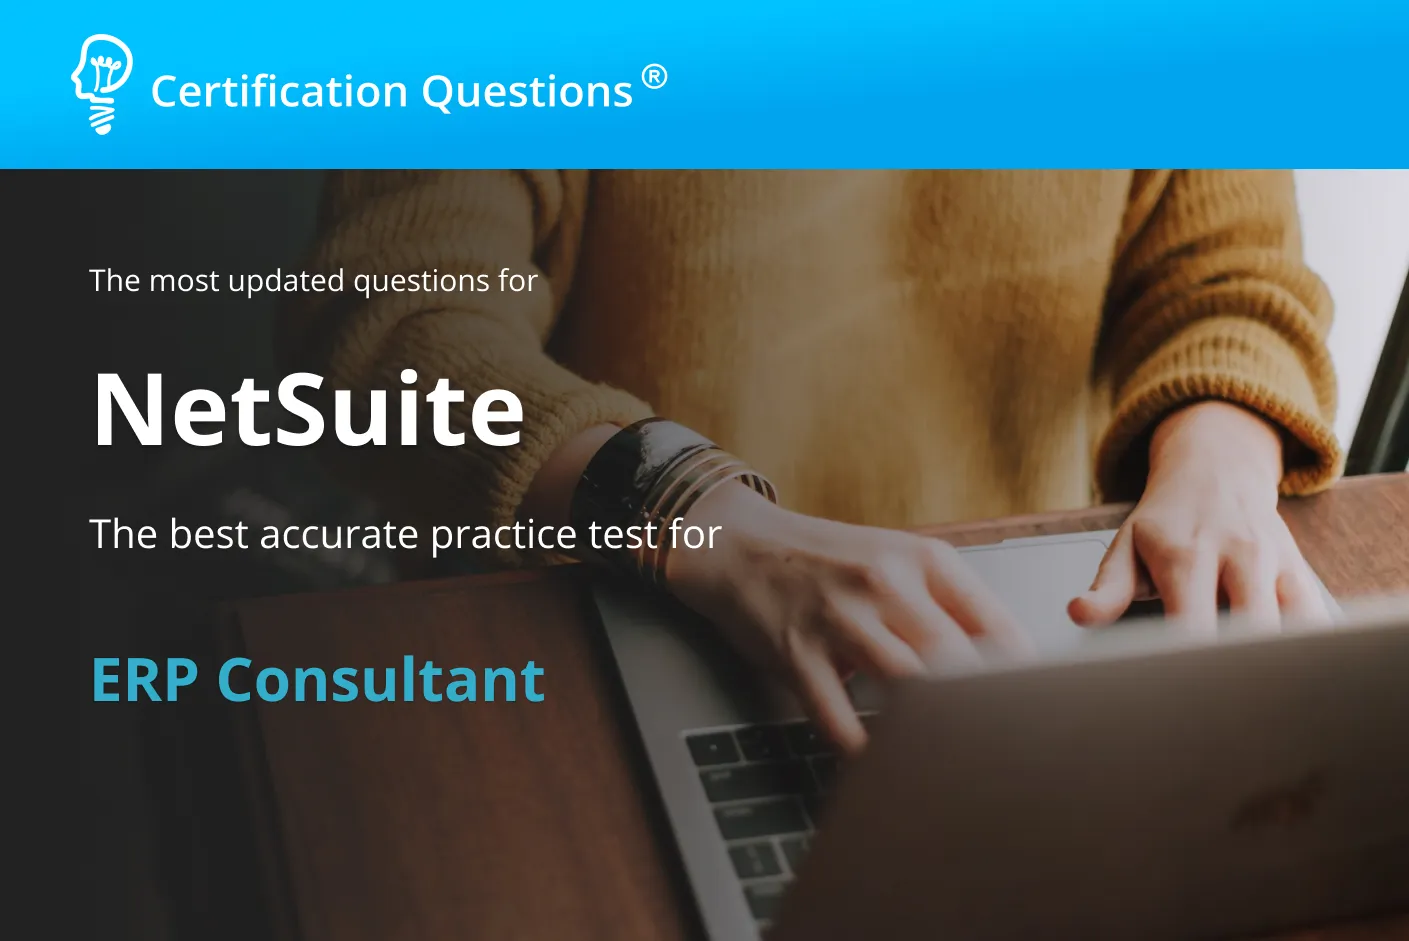 In this study guide you will learn about the NetSuite ERP consultant exam in the USA.